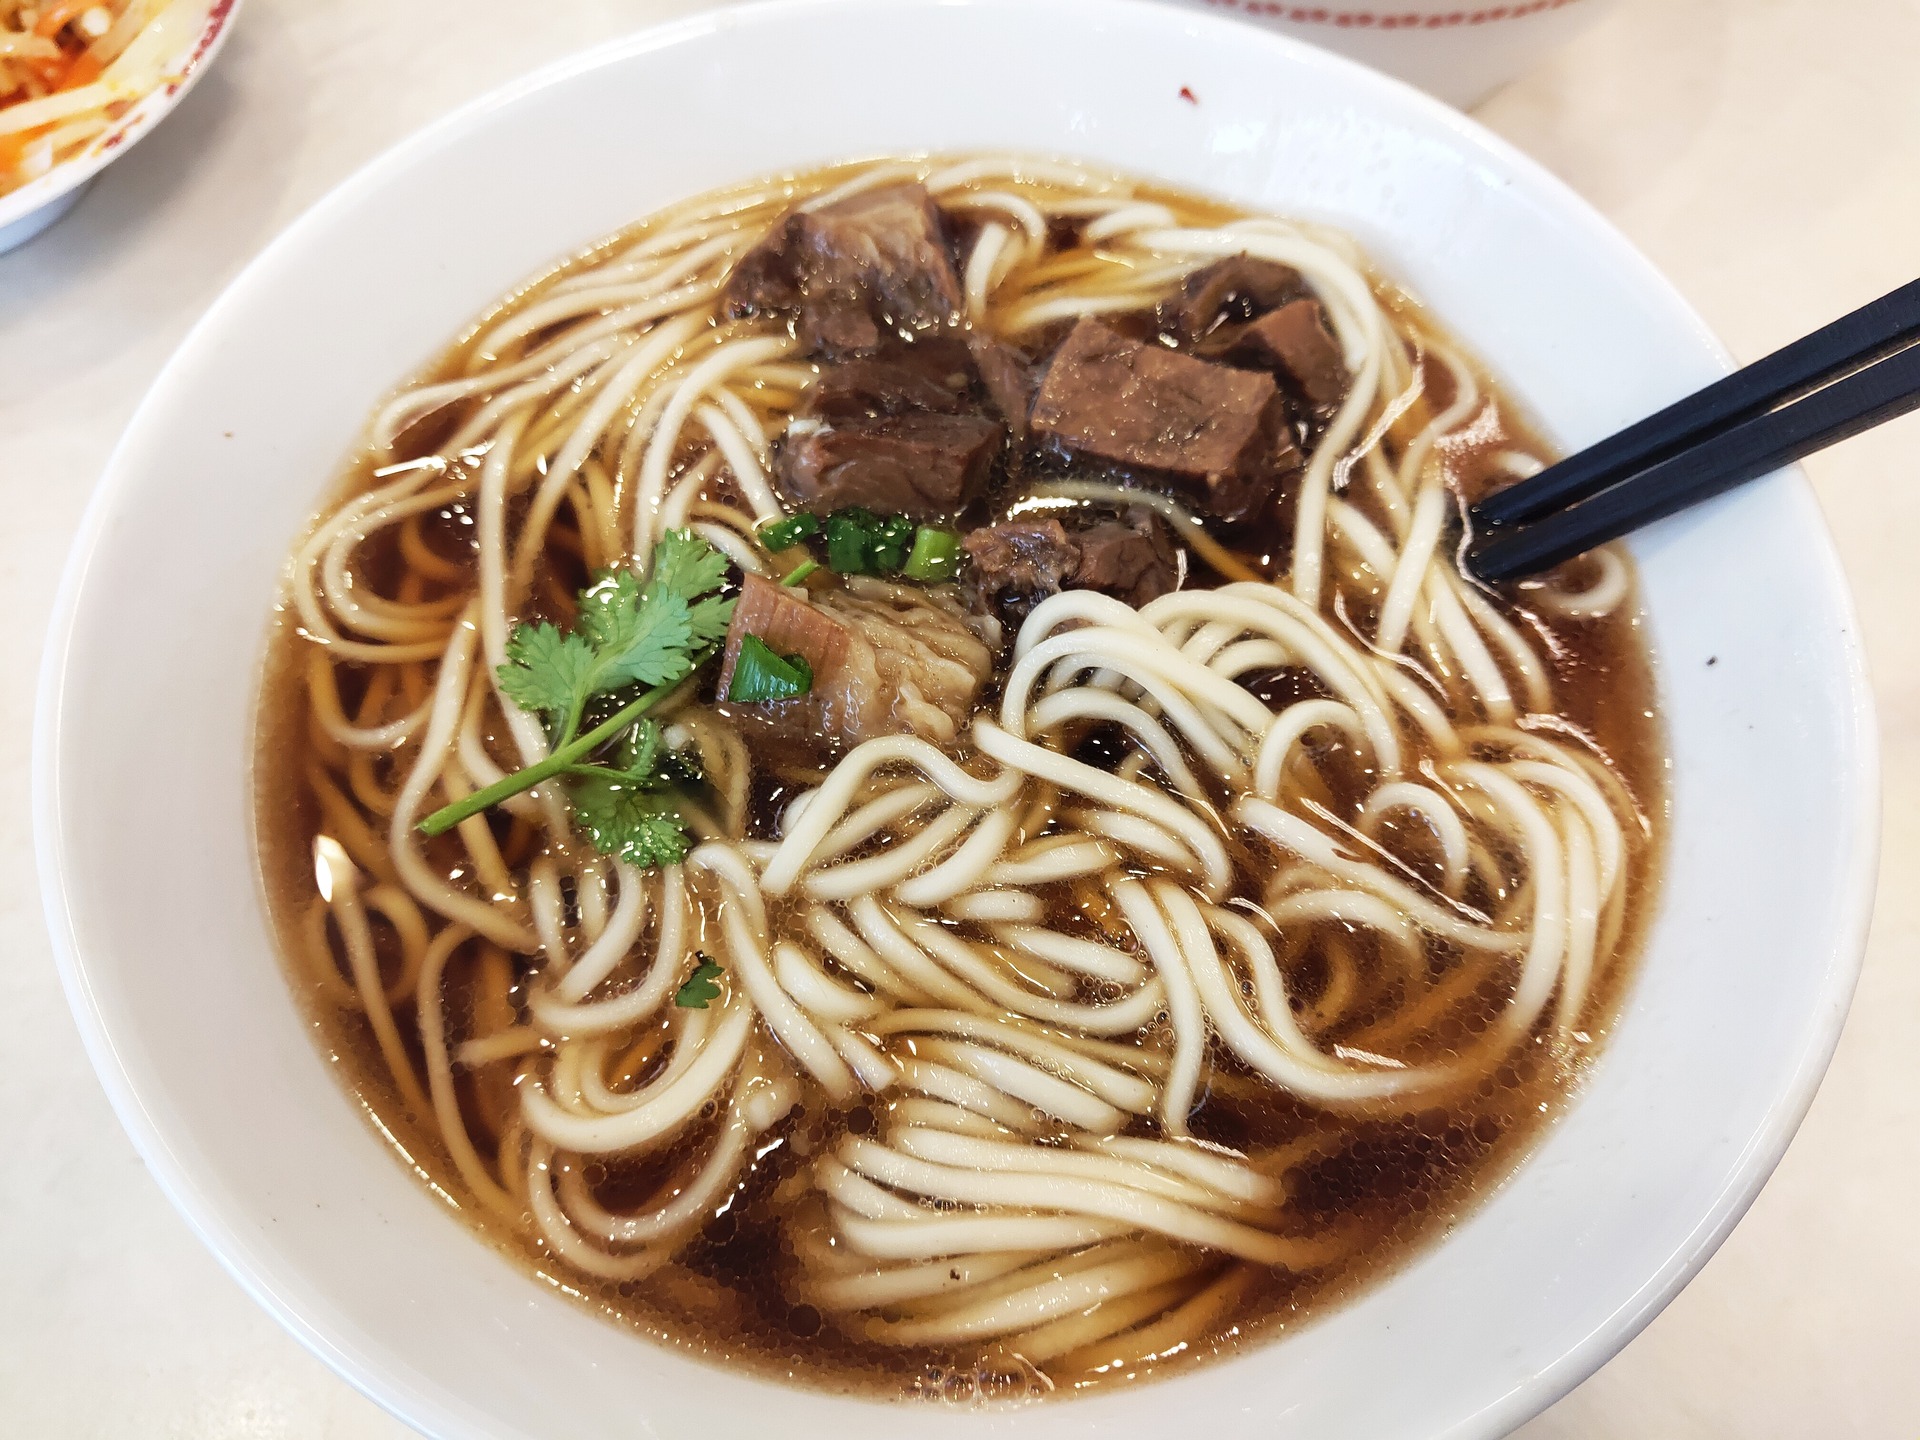 Taiwanese beef noodles in soup